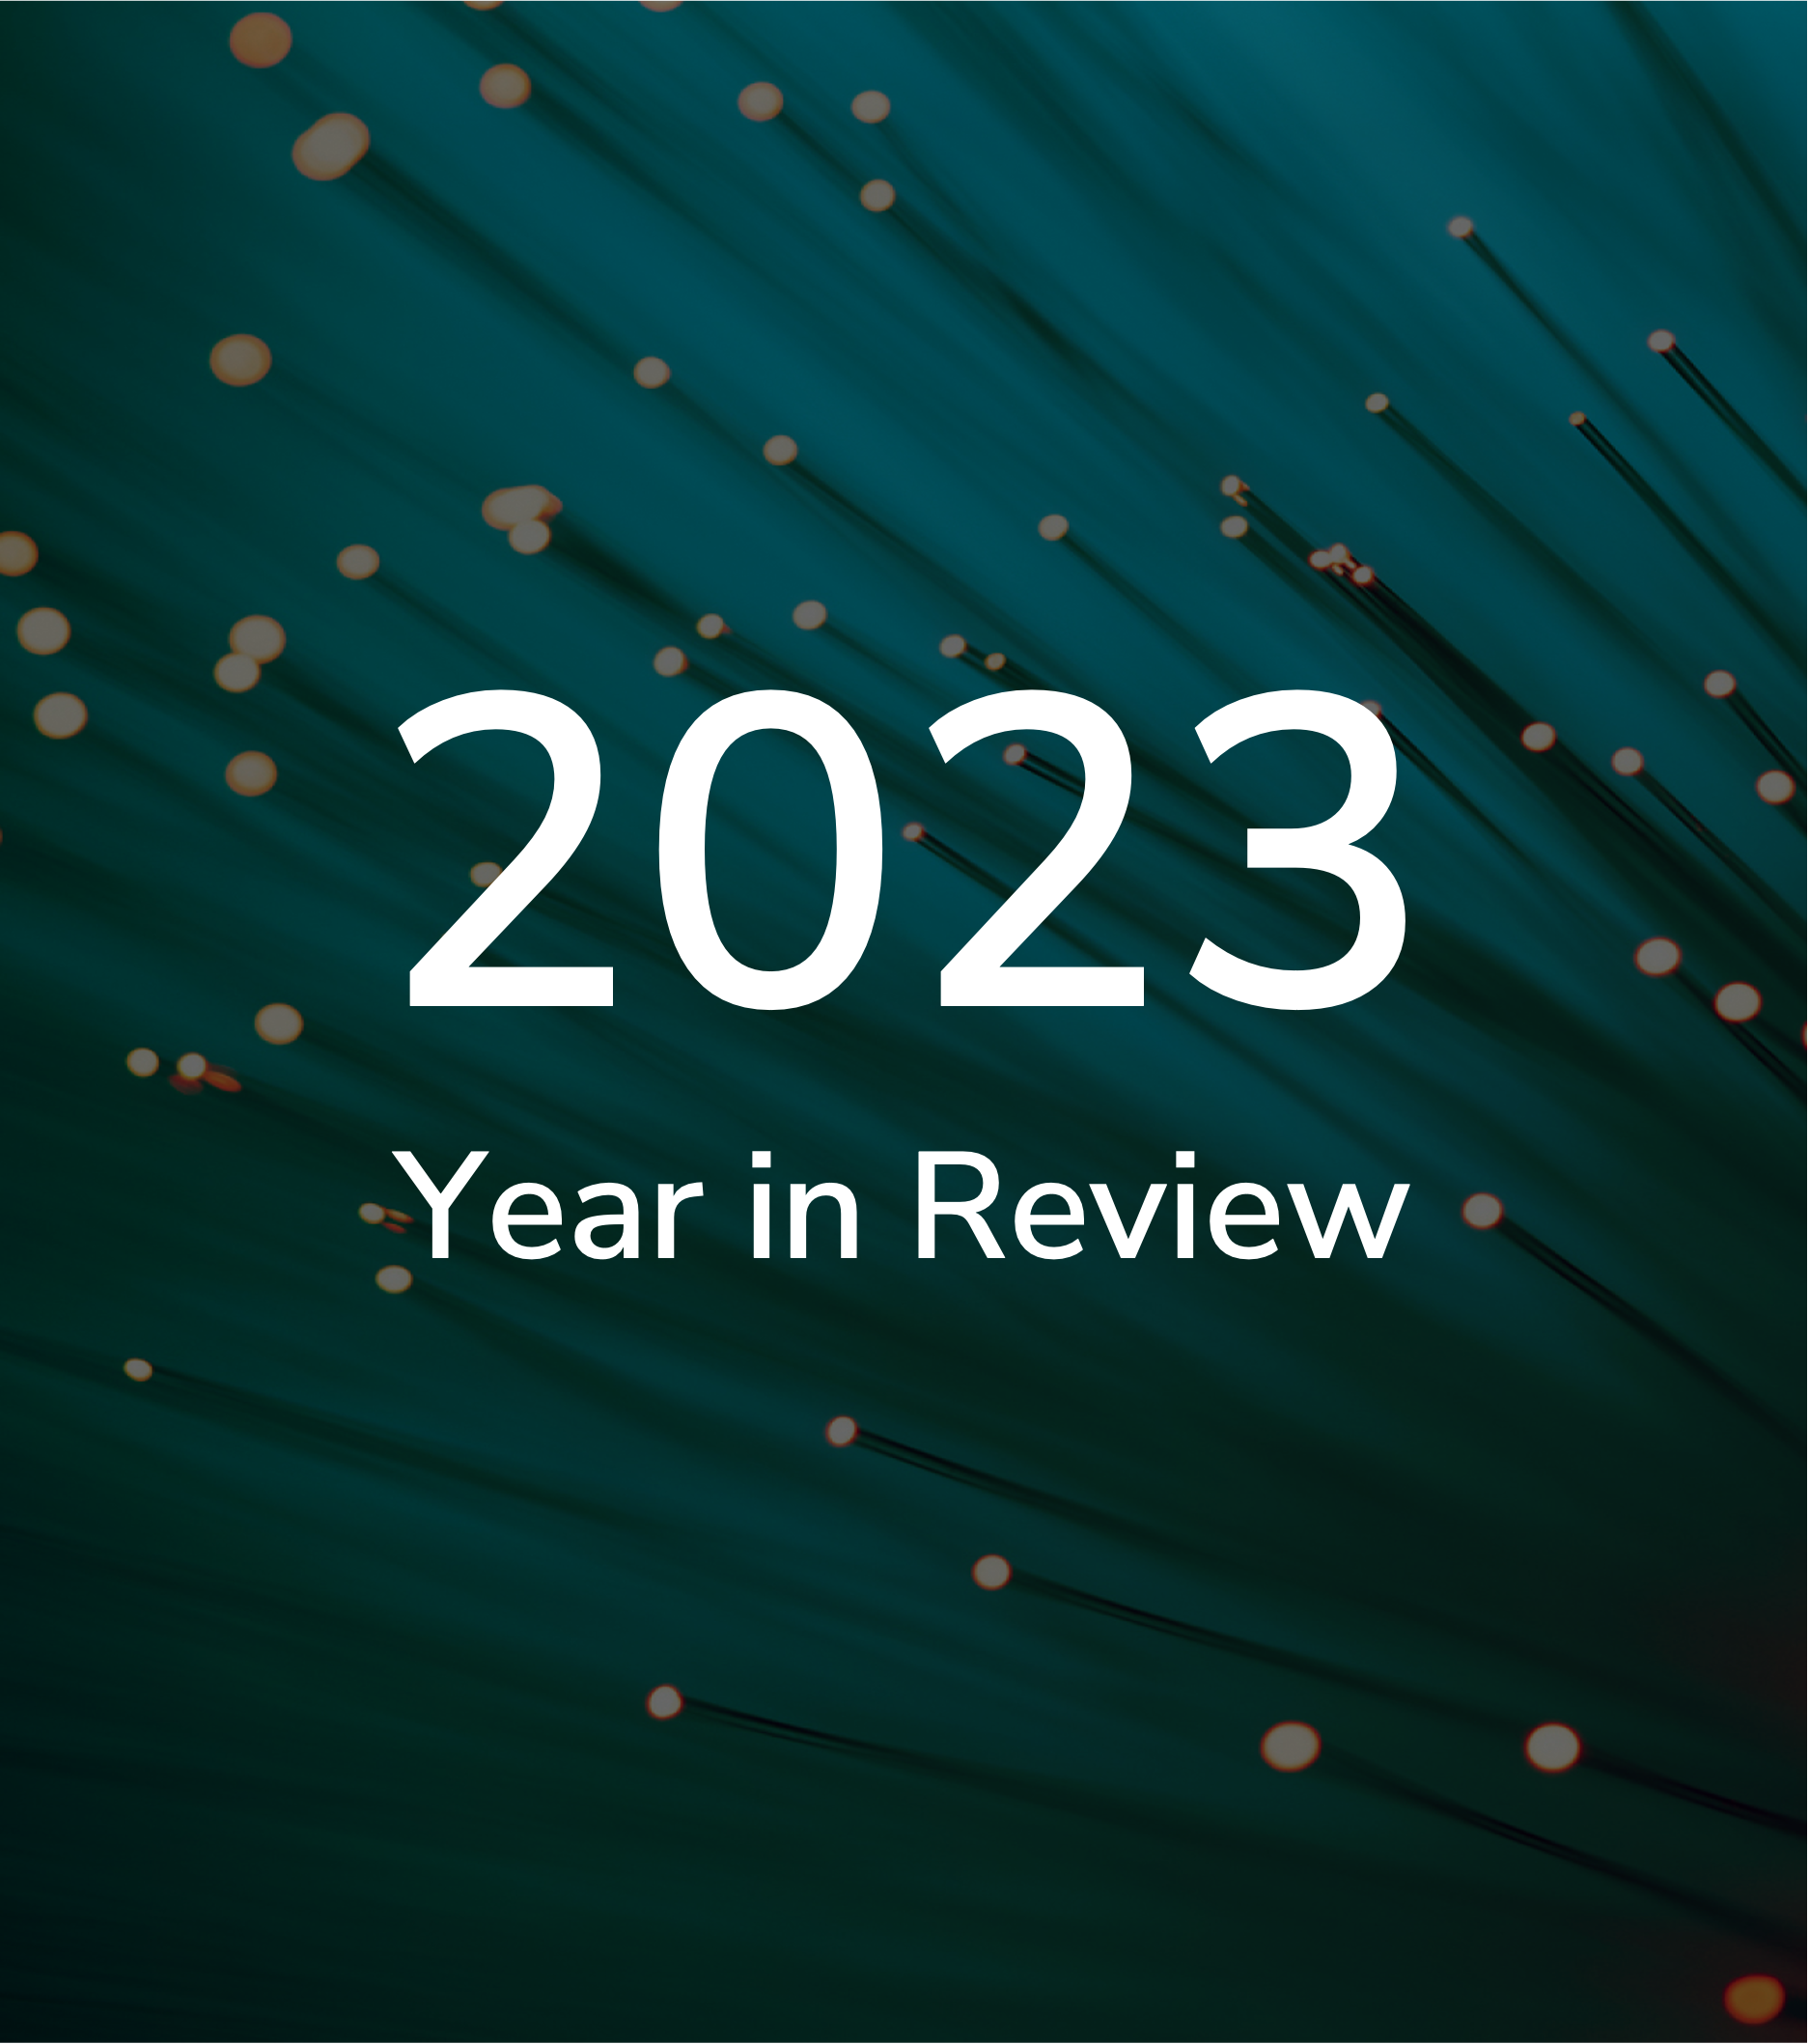 Our 2023 Year in Review